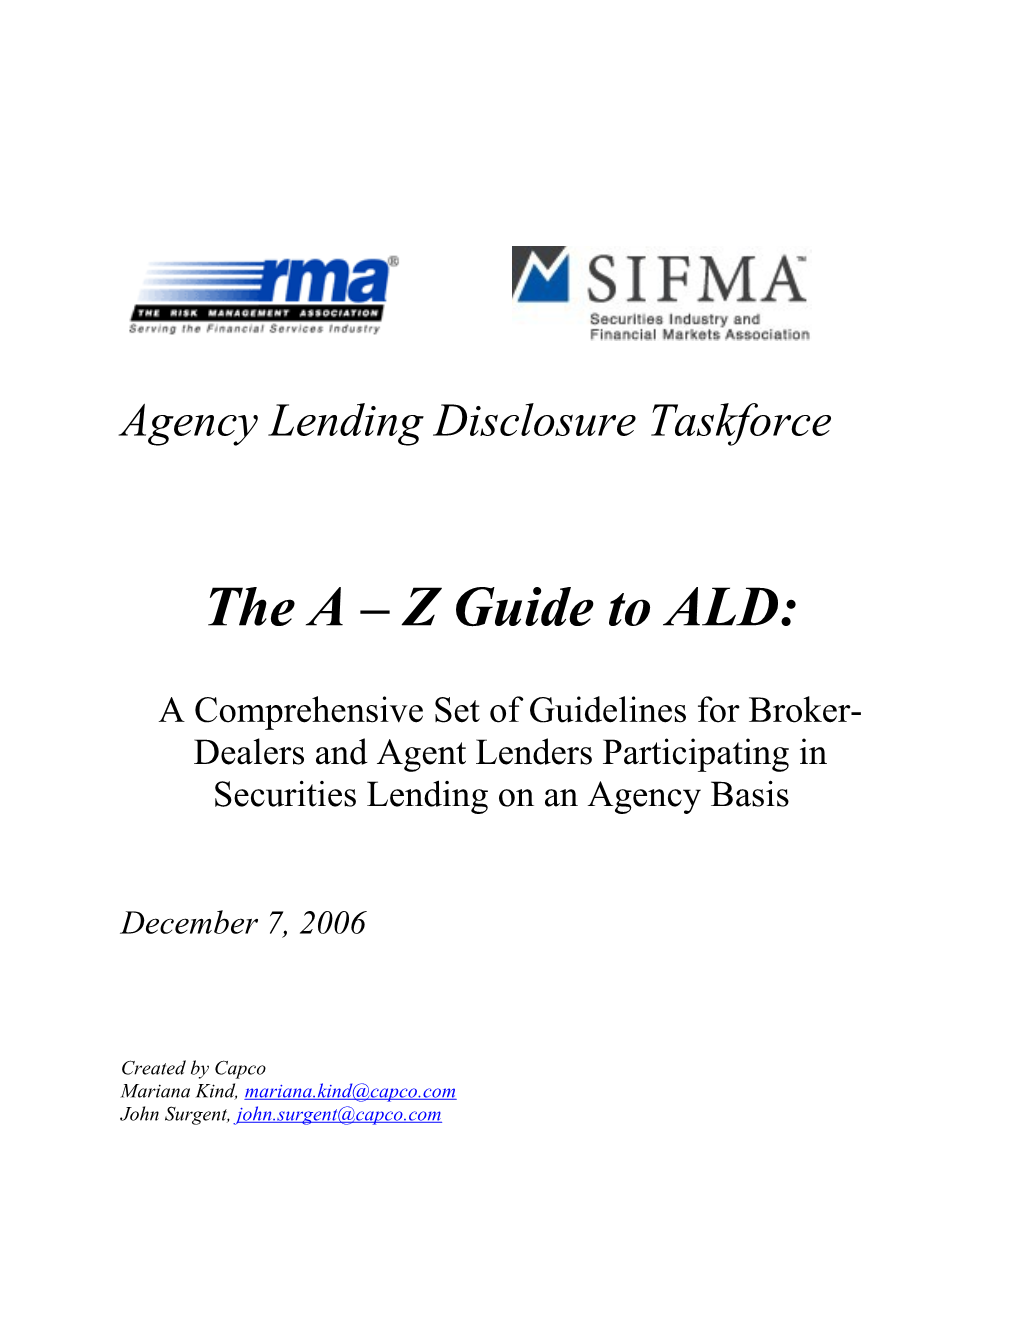 ALD - A-Z Guide To Agency Lending Disclosure (Word)